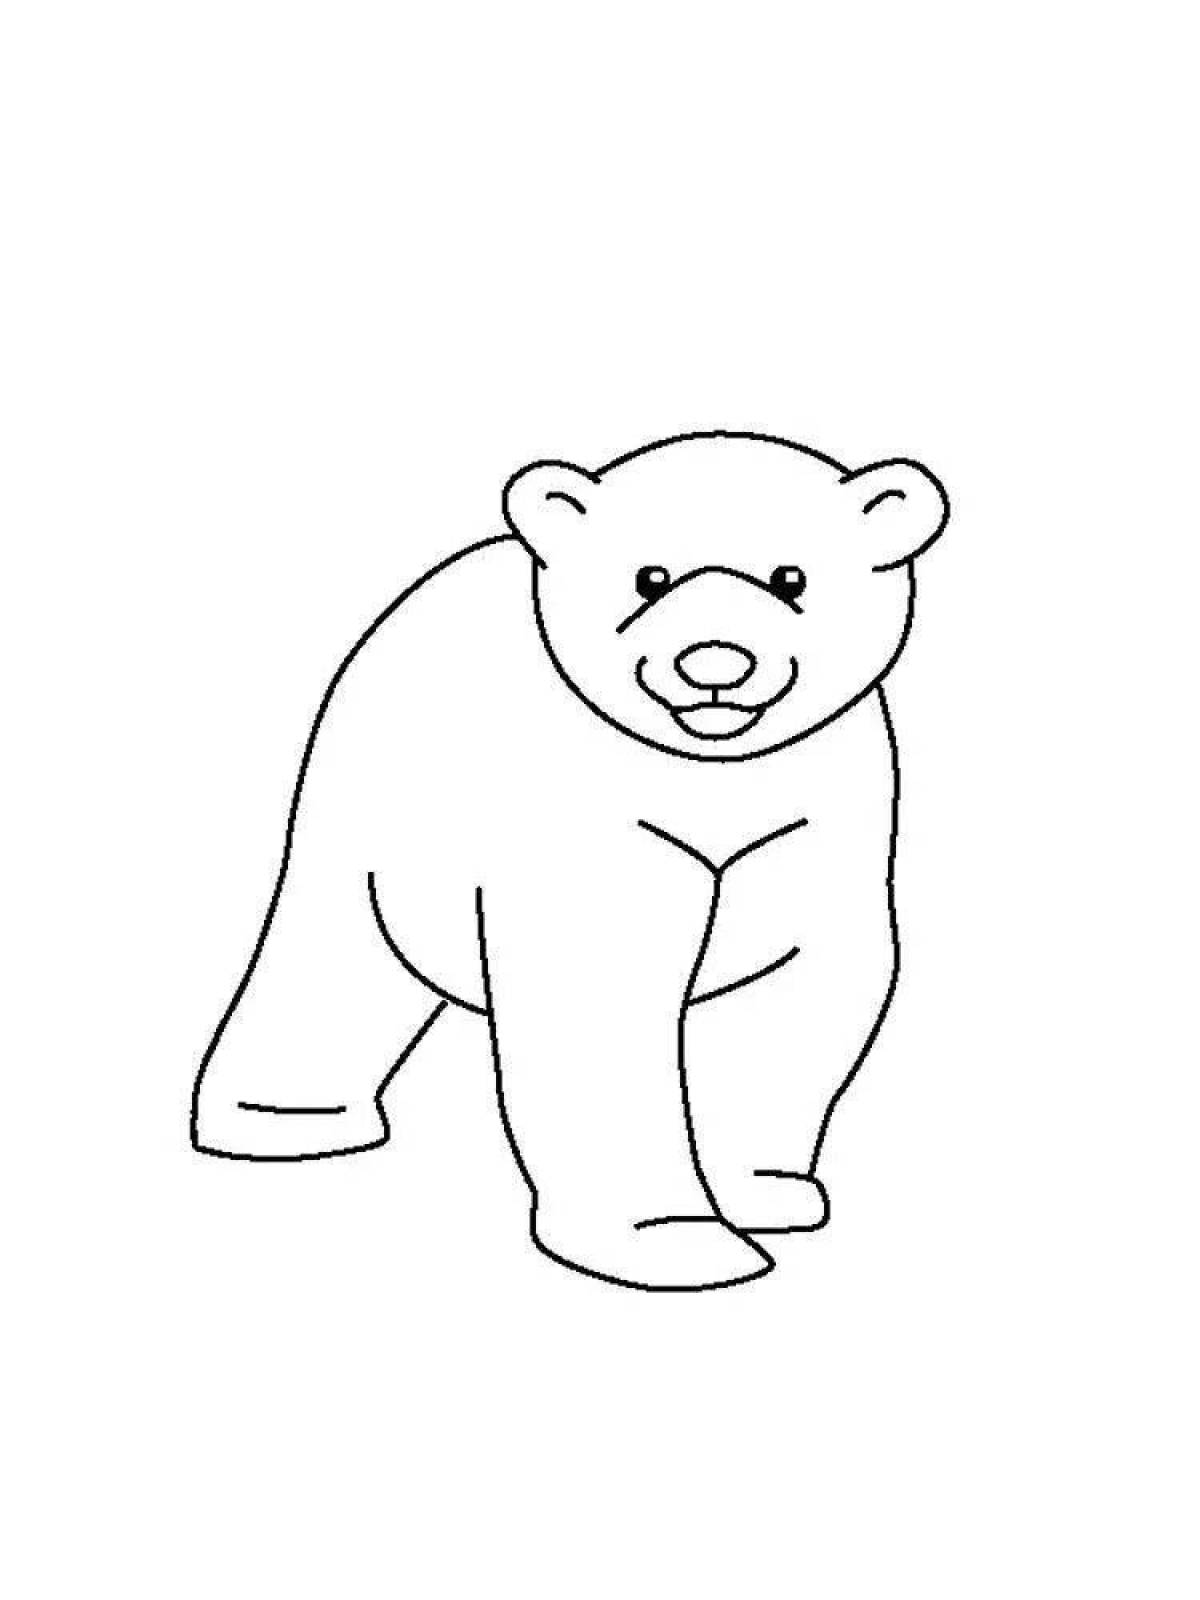 Coloring book fluffy white teddy bear